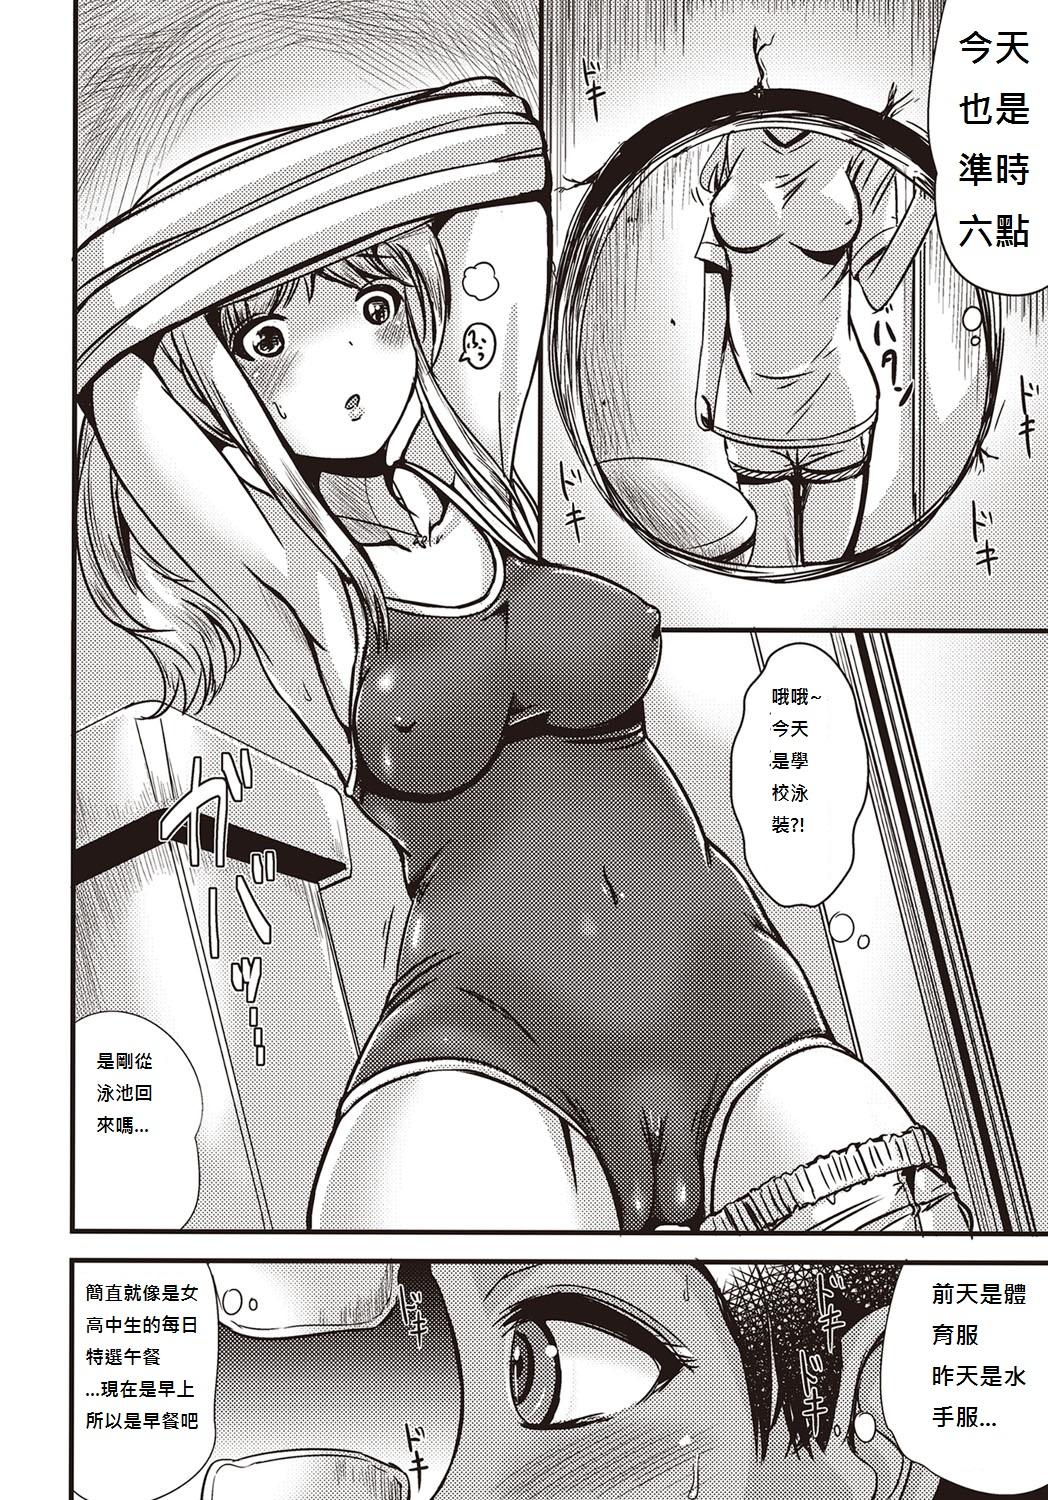 Sola Chishoujo Suit Gilf - Page 2